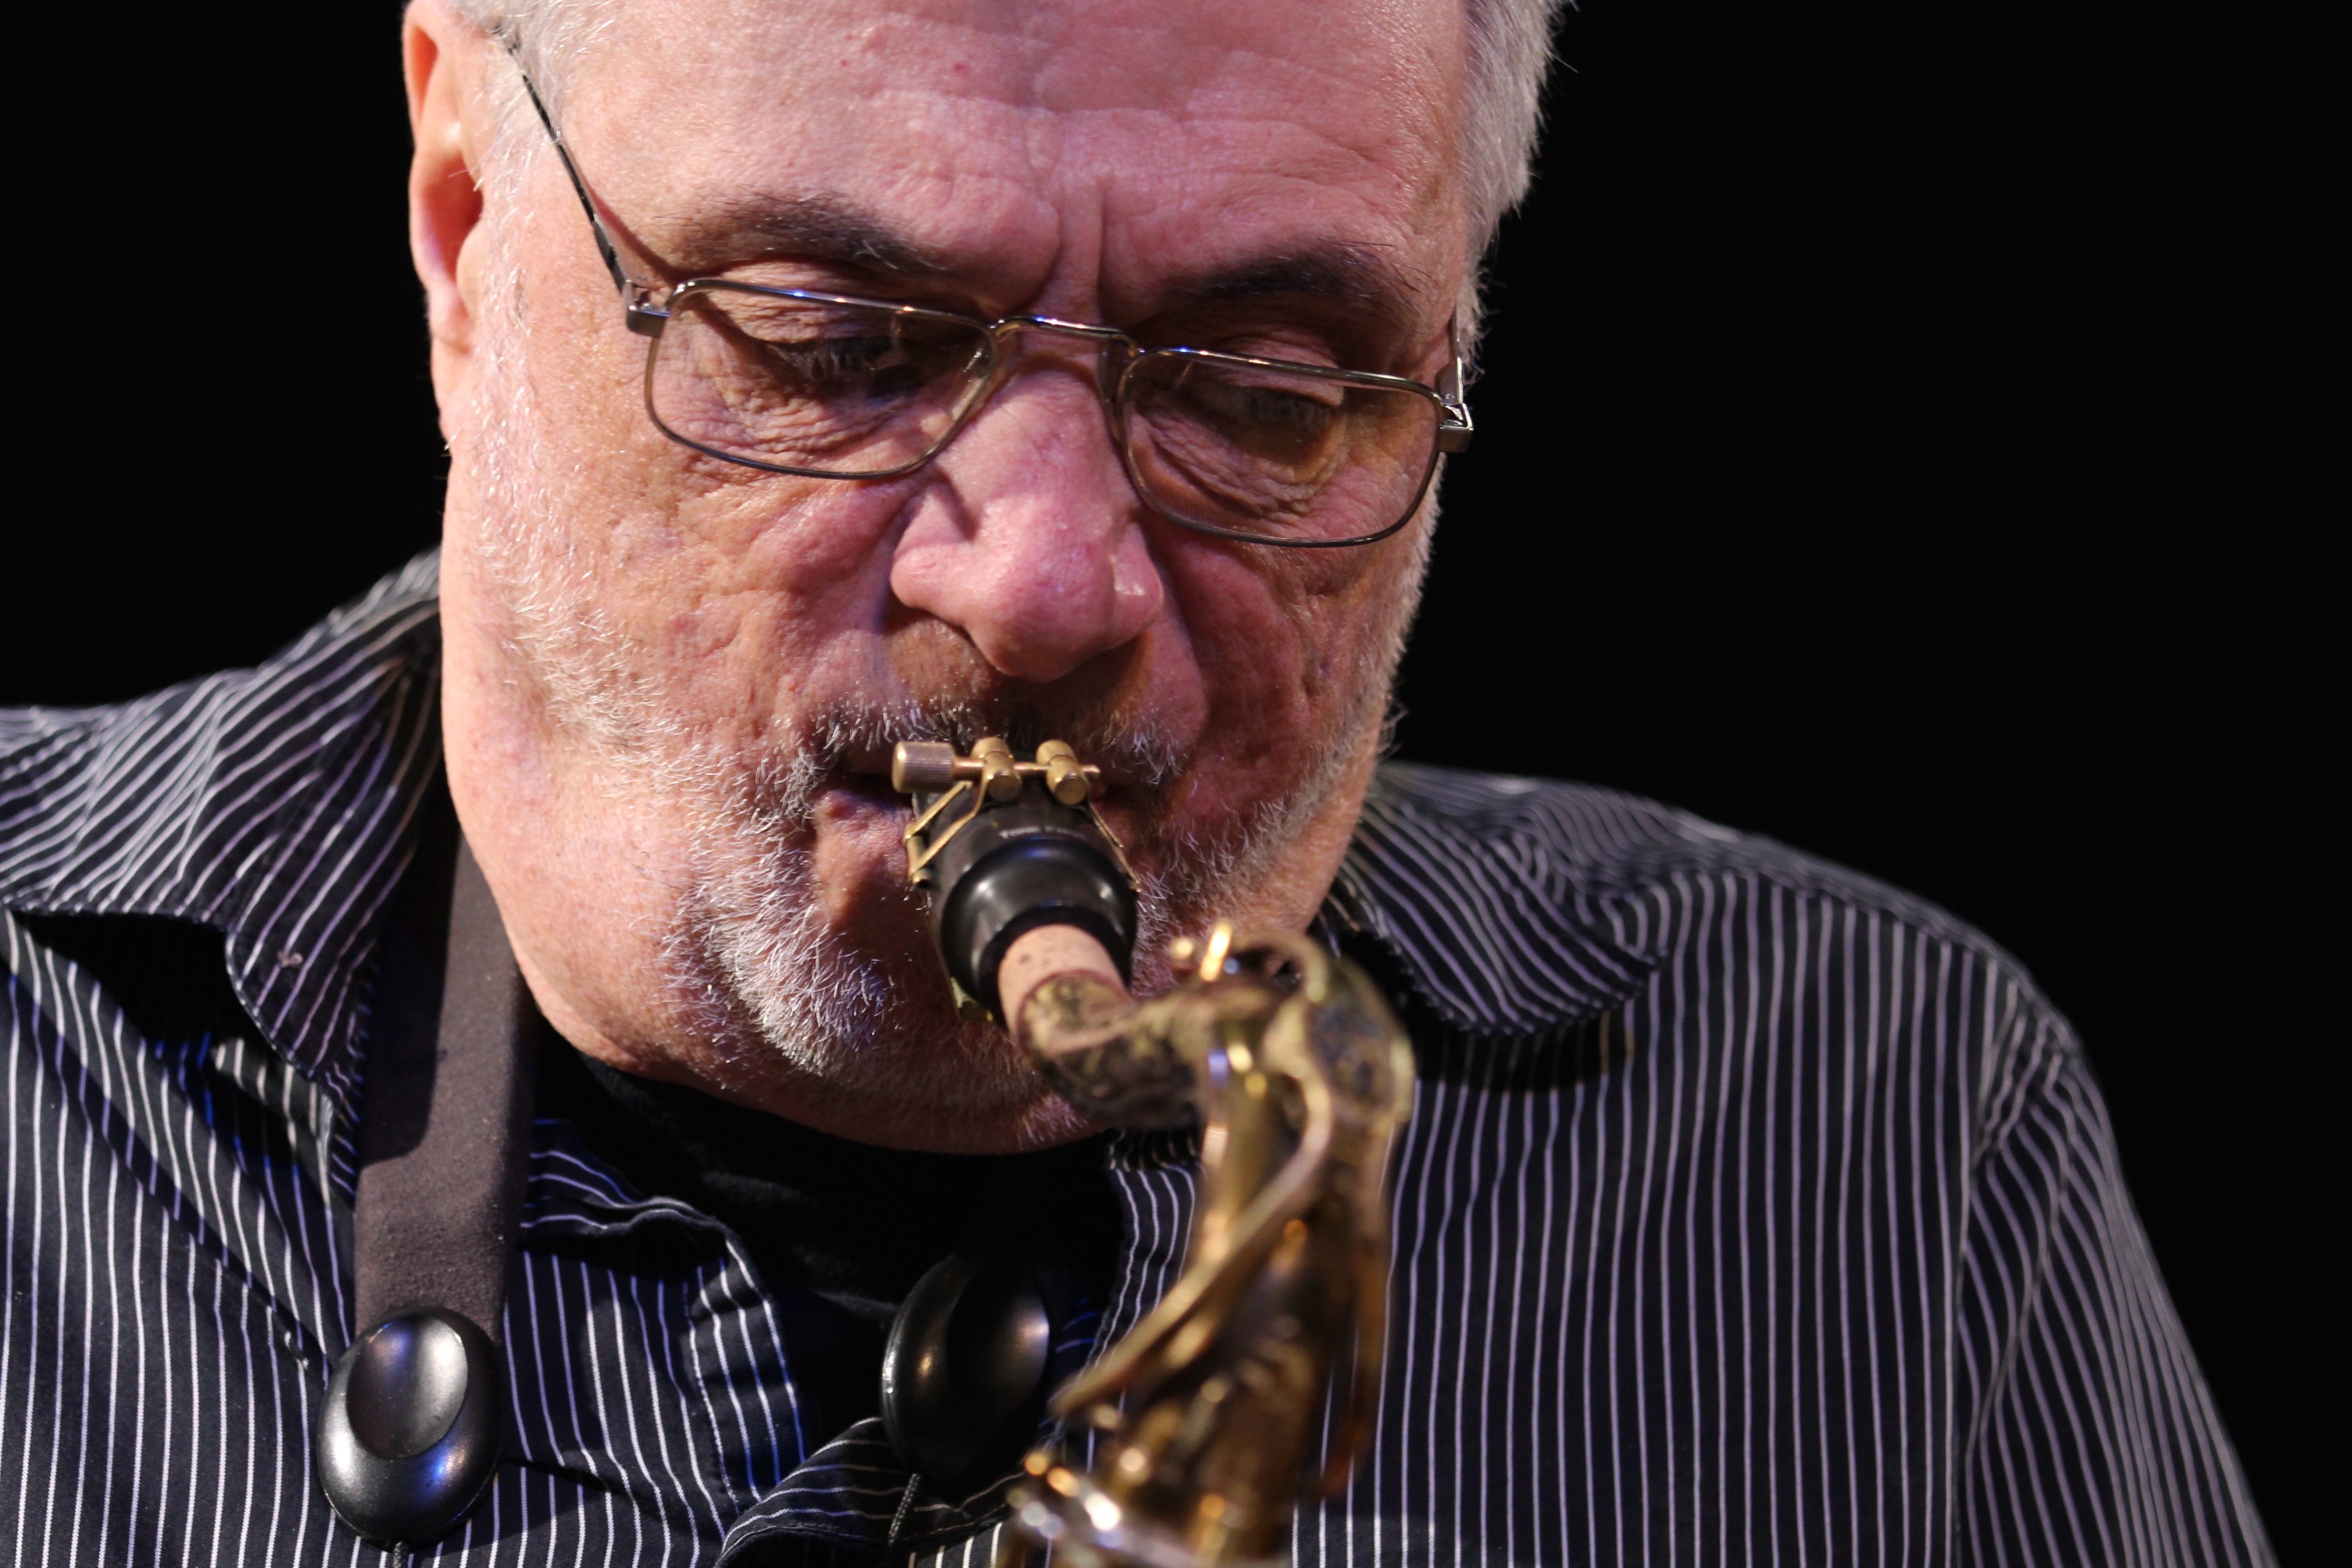 Closeup of man with grey hair and glasses playing a saxophone